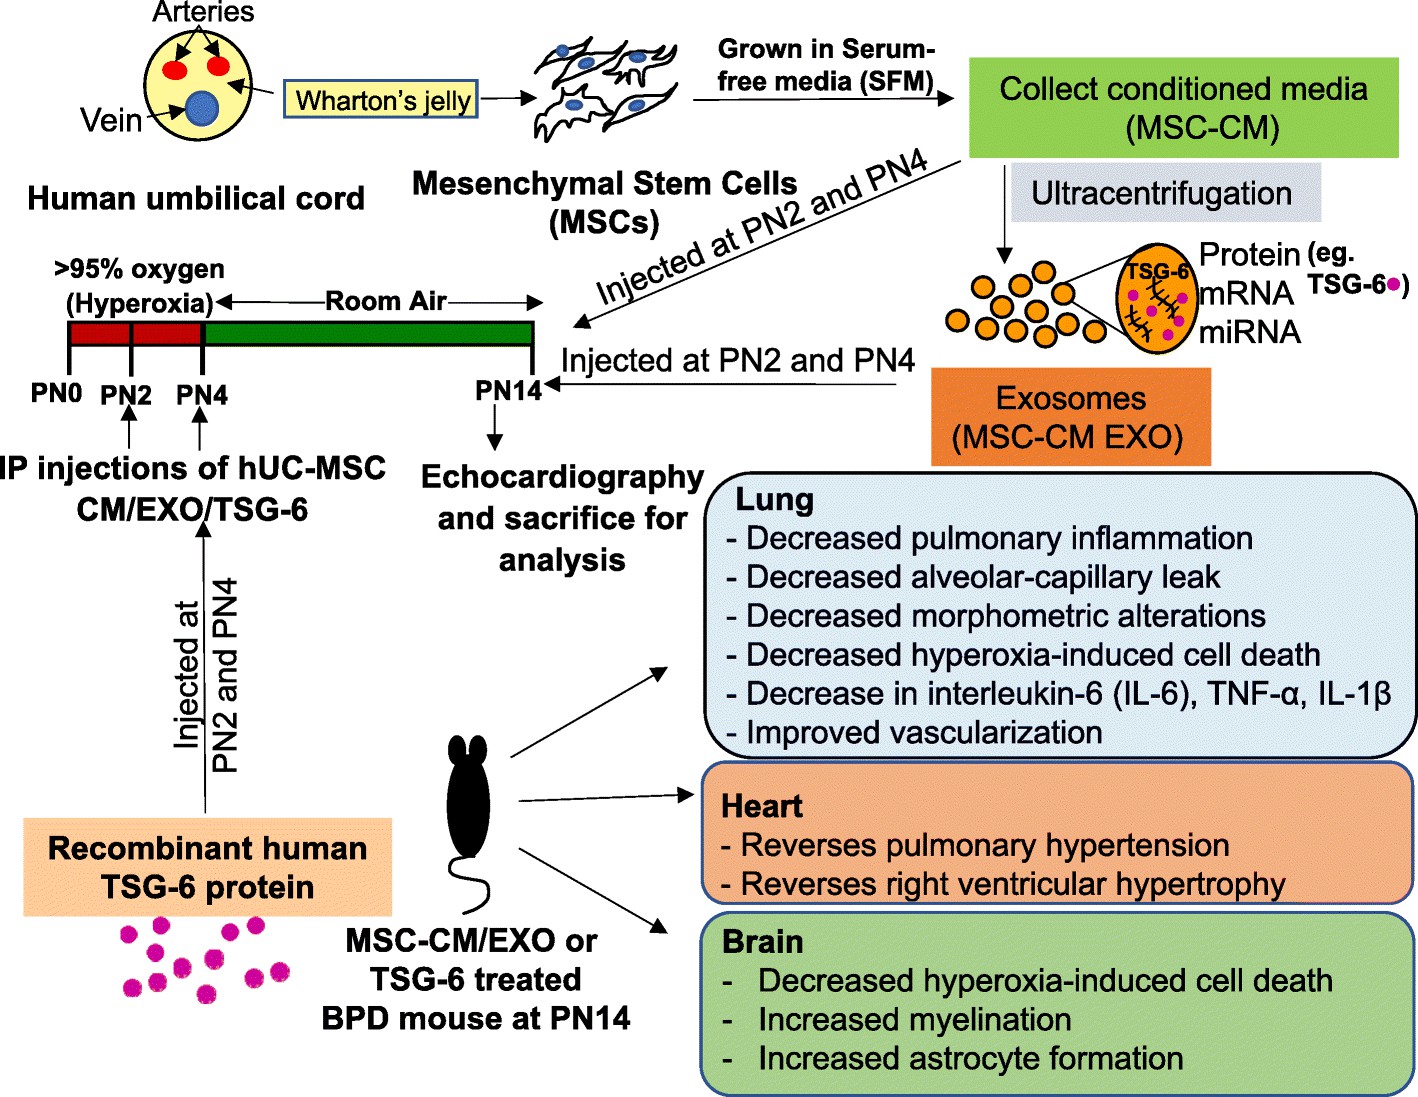 Schematic representation of MSC-CM/EXO/TSG-6 treatment regimen and outcomes in the mouse model of BPD.